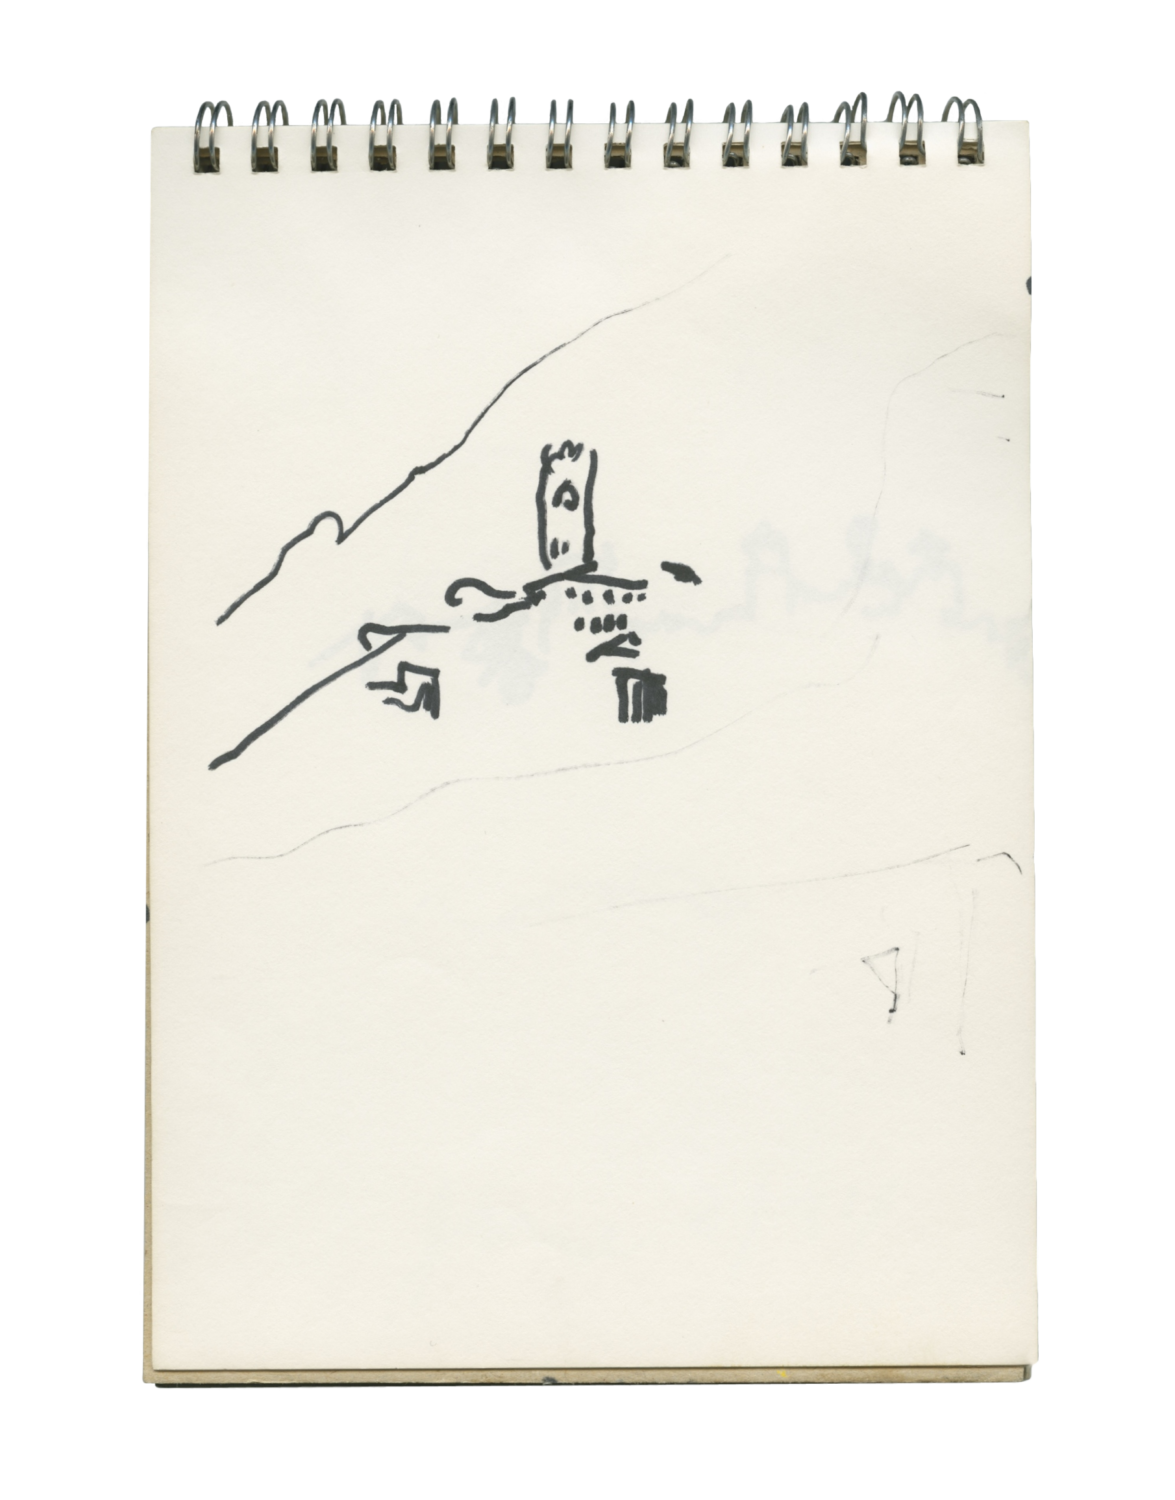 Sketch and notebook (June 1974)